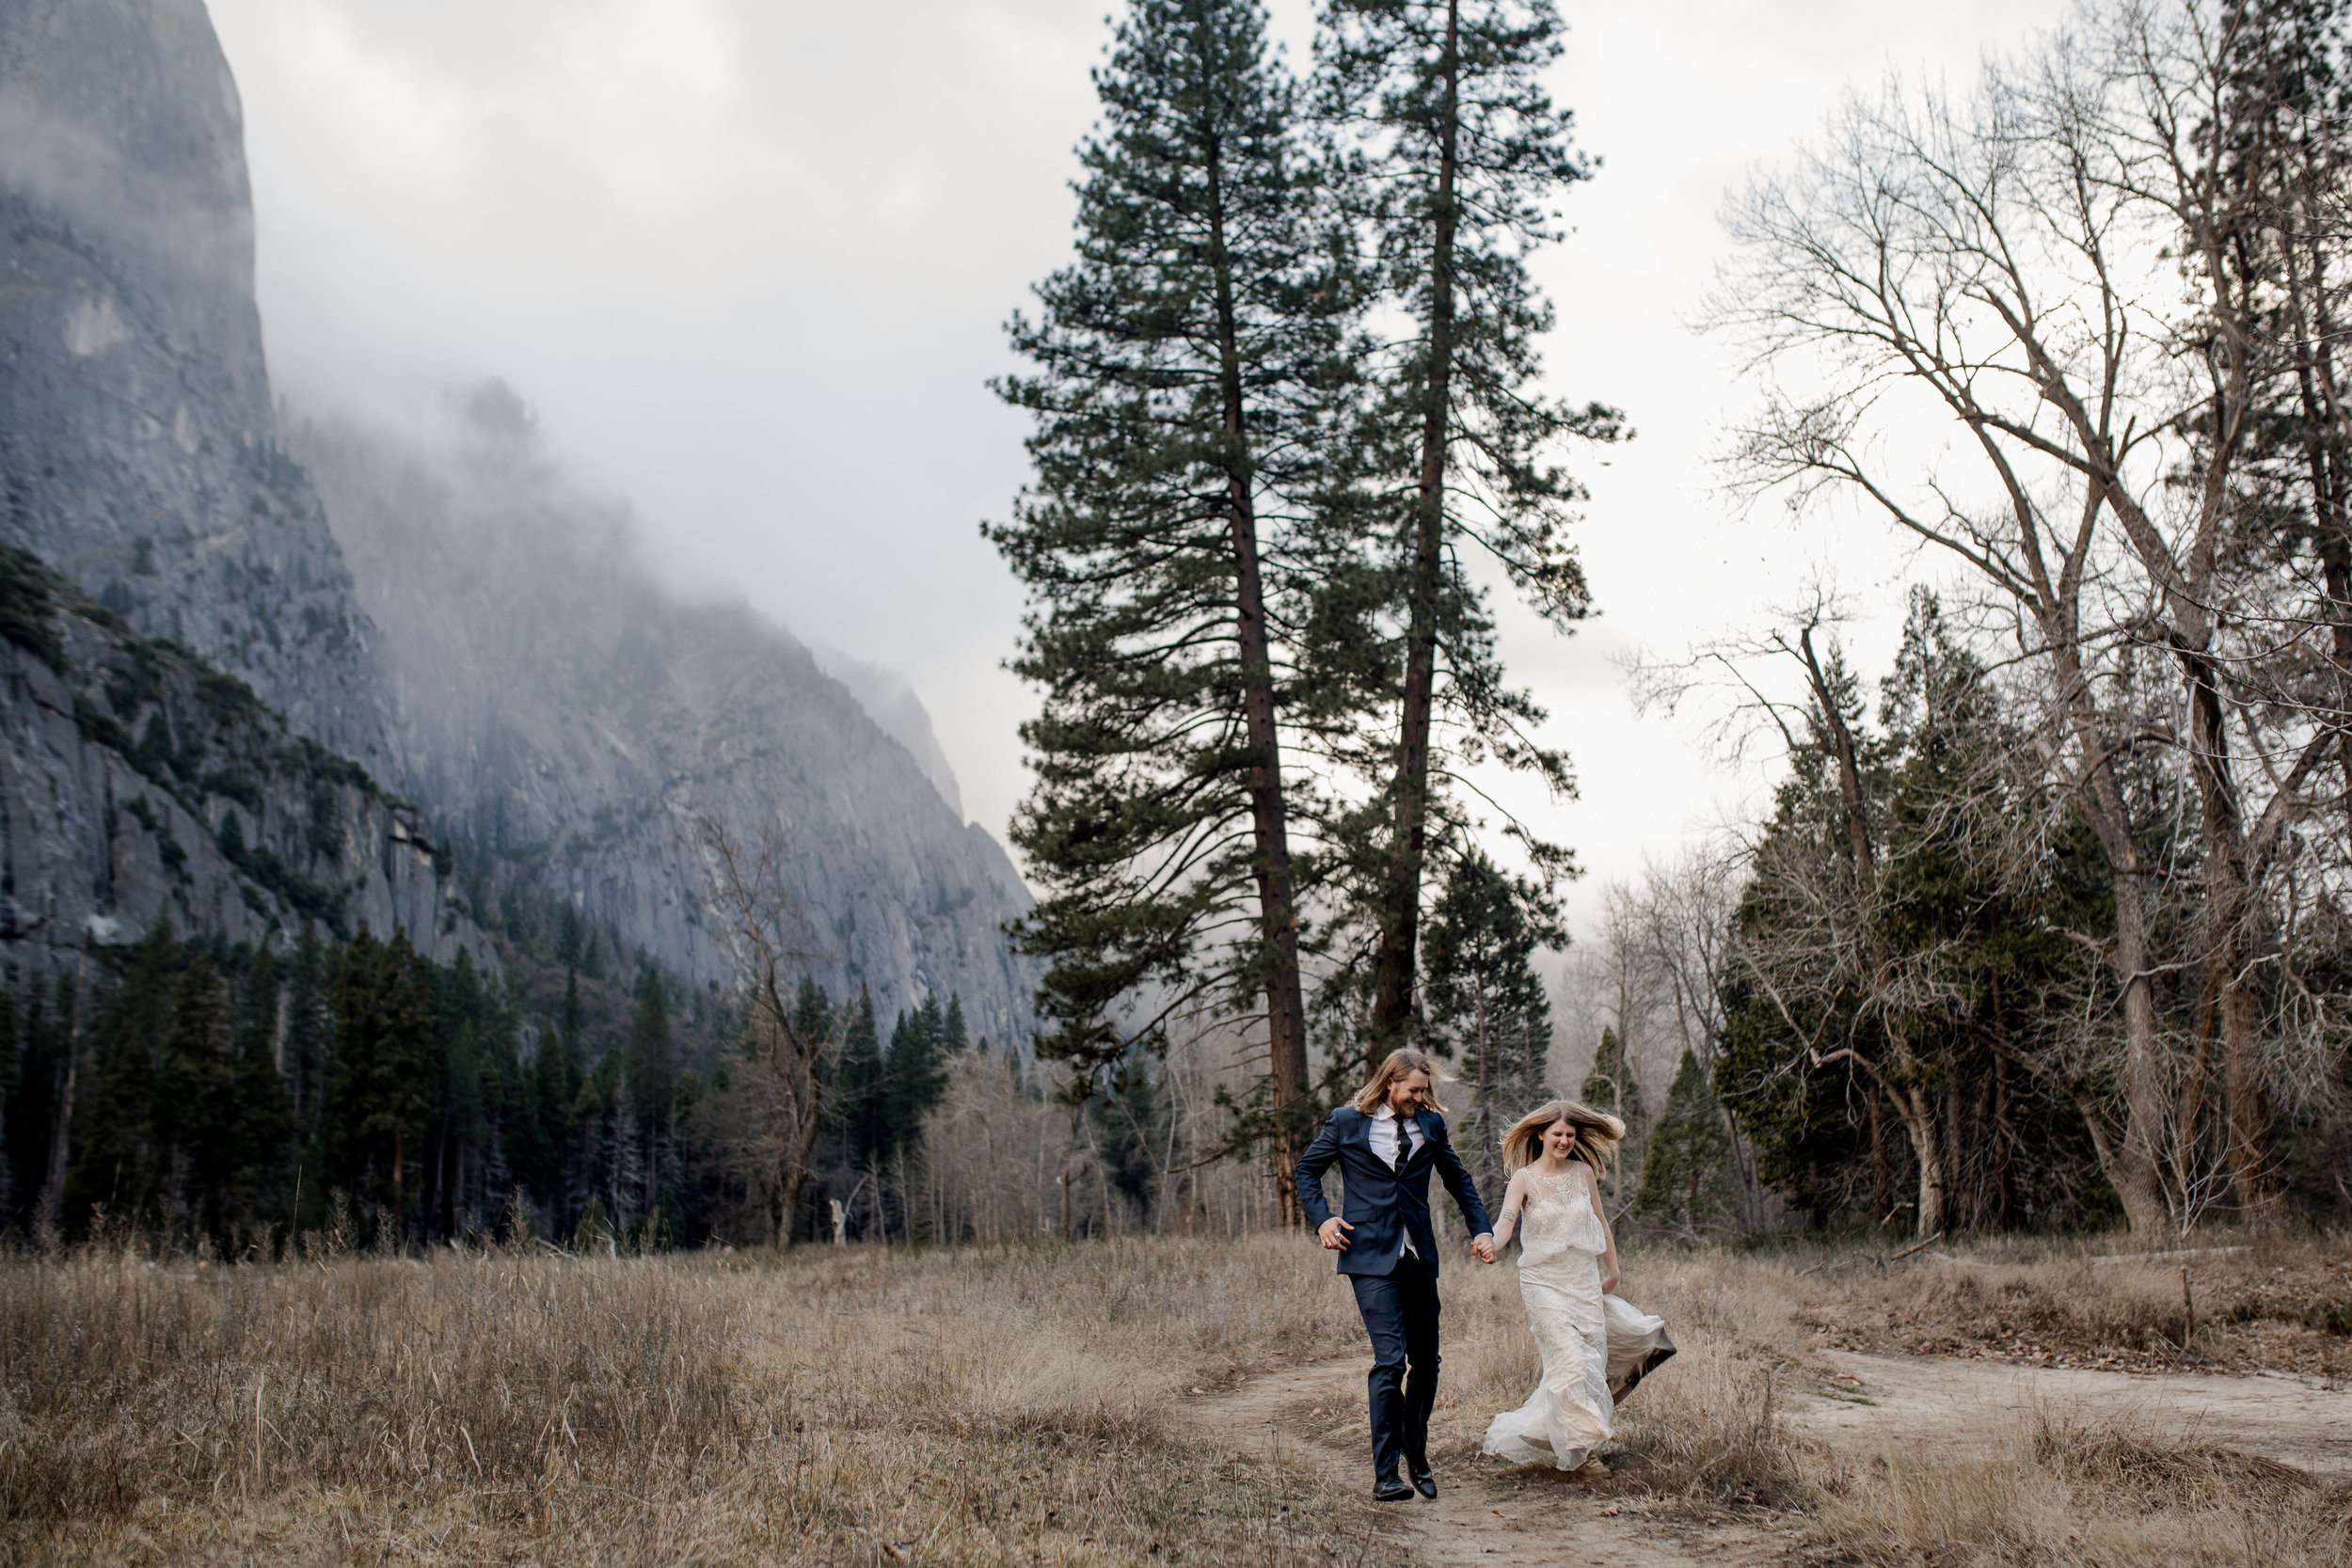 nicole-daacke-photography-yousemite-national-park-elopement-photographer-winter-cloud-moody-elope-inspiration-yosemite-valley-tunnel-view-winter-cloud-fog-weather-wedding-photos-60.jpg